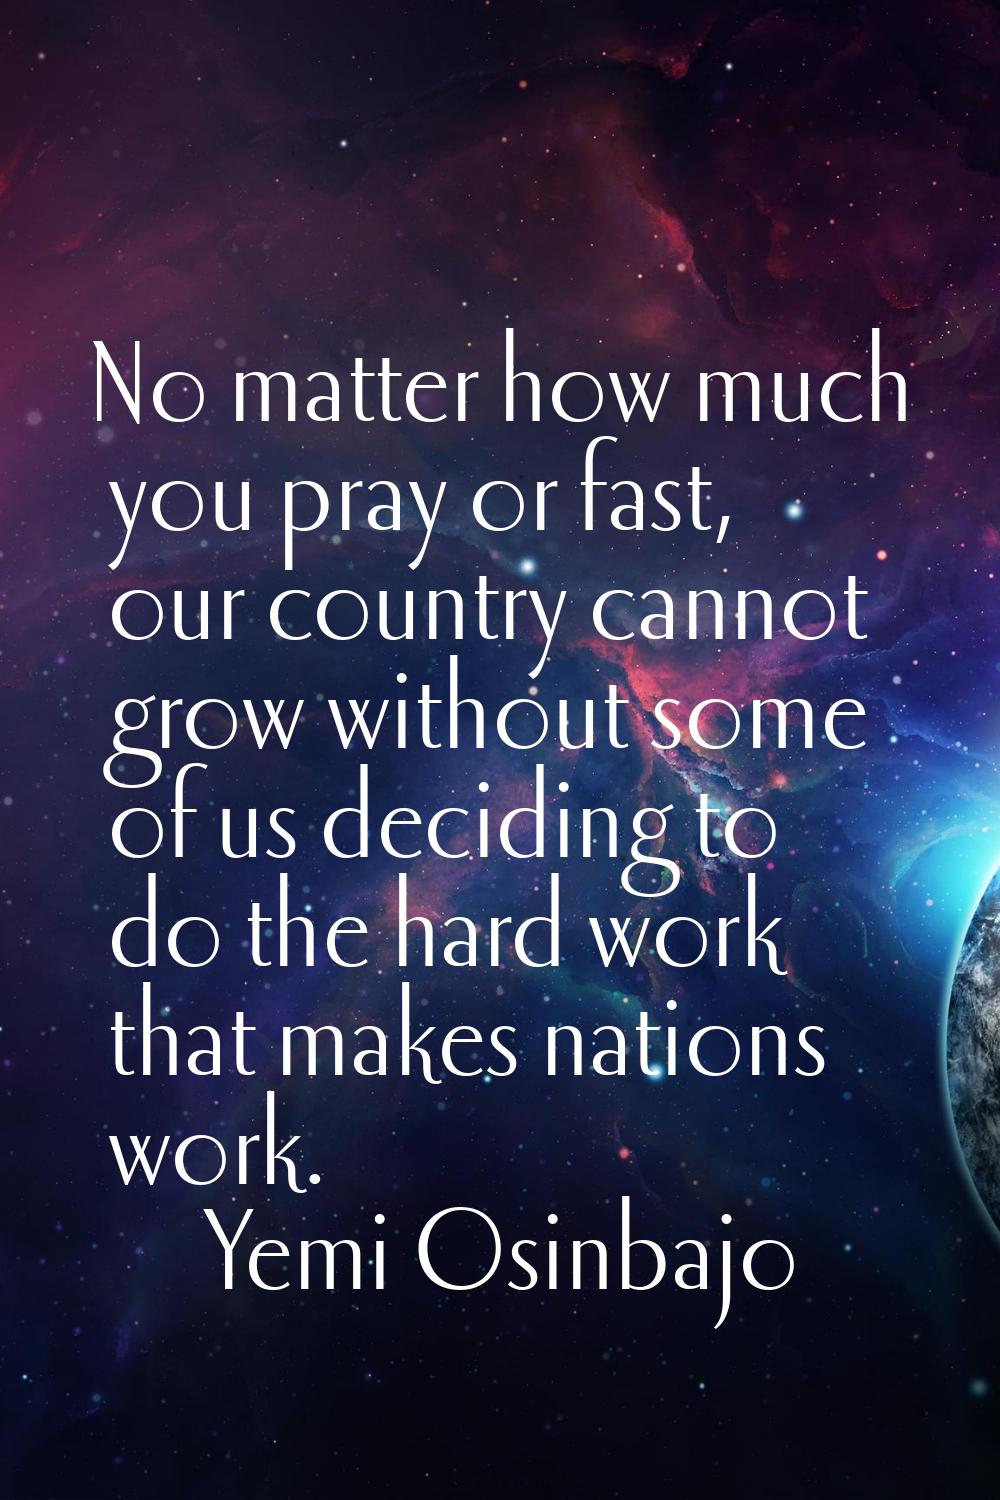 No matter how much you pray or fast, our country cannot grow without some of us deciding to do the 